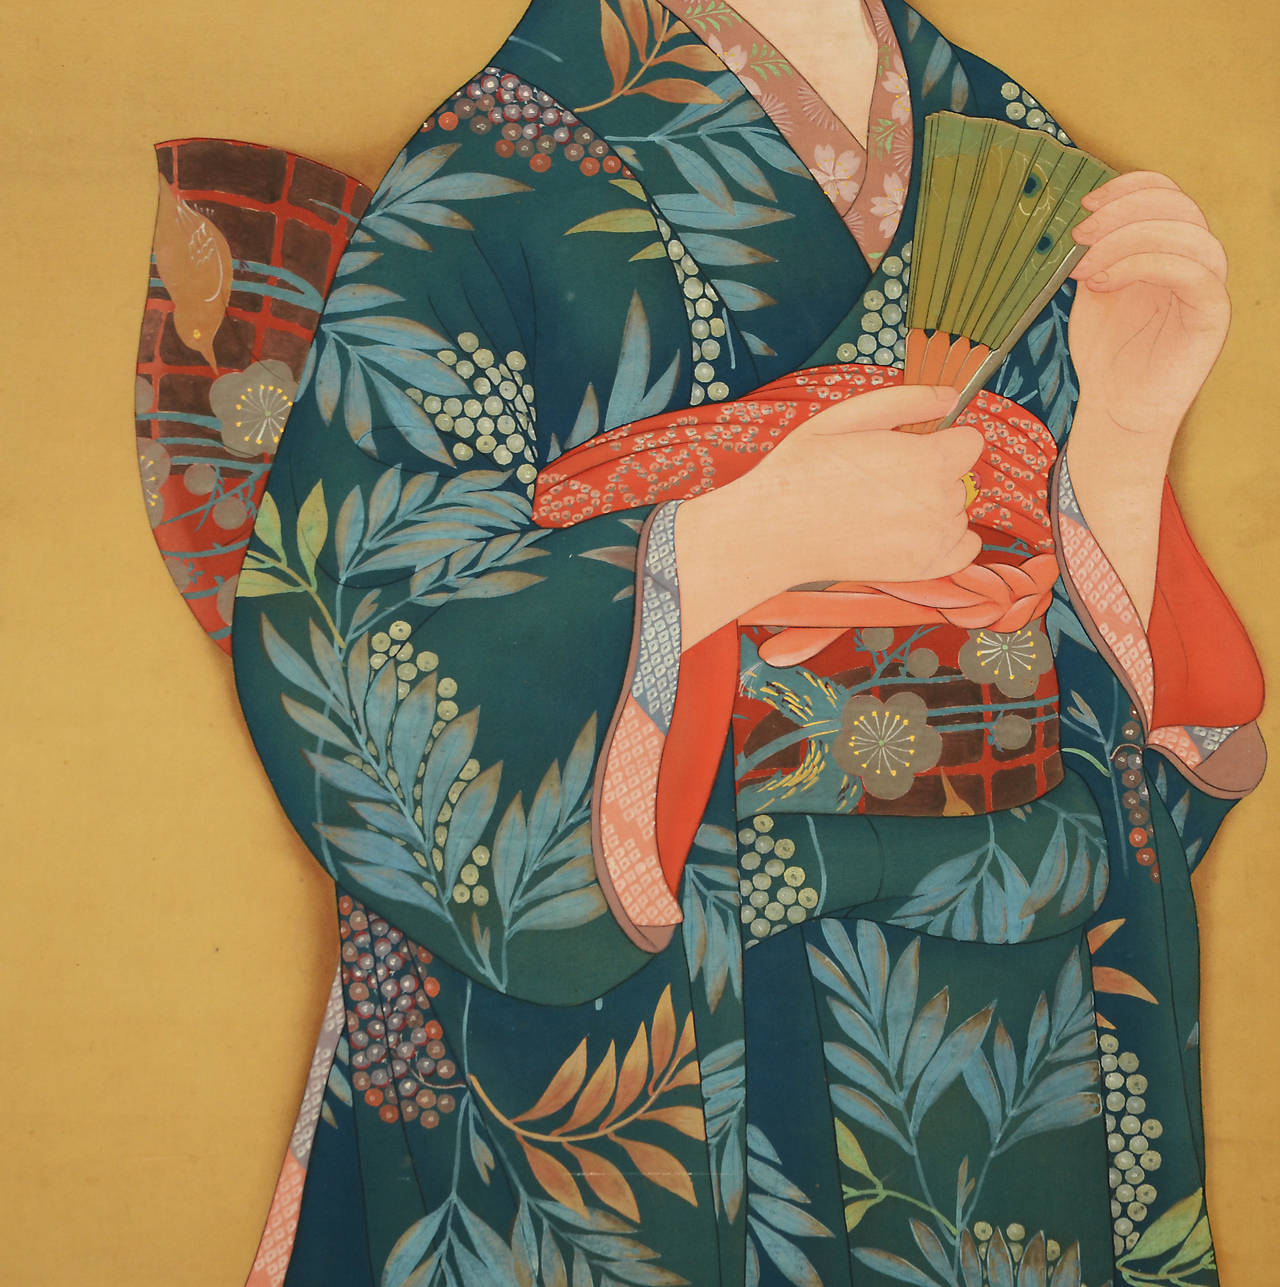 Rare Japanese Taisho period Bijin-ga style painting of a beautiful woman in period kimono holding a fan, circa 1920.

Bijin-ga is a Japanese term used to describe paintings or pictures of beautiful women in Japanese Art.

Materials ink and color